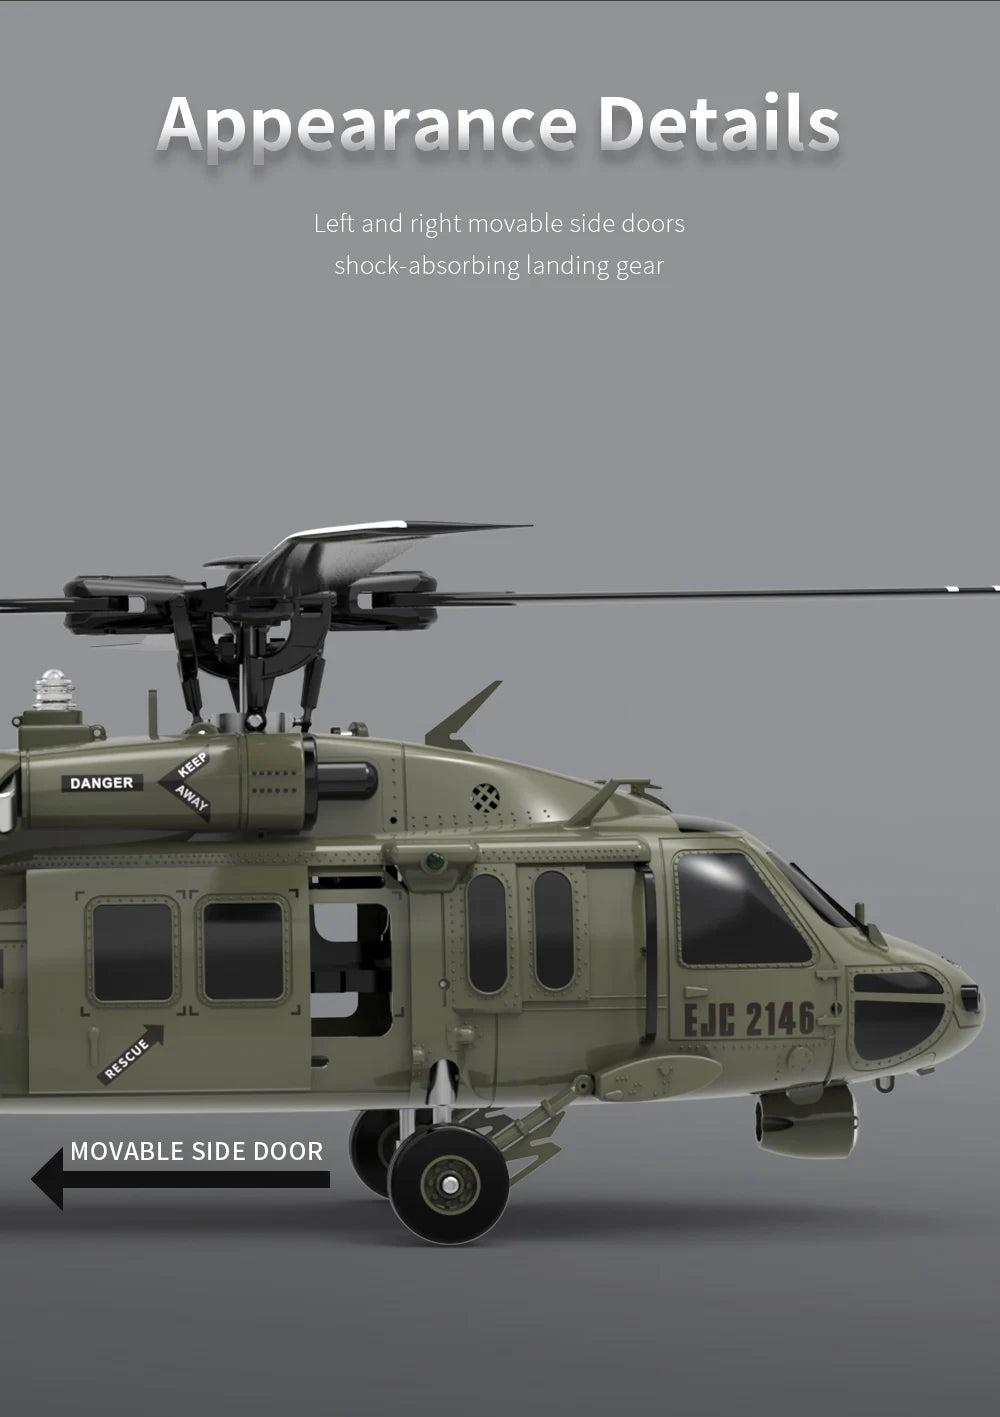 F09 RC Helicopter, Appearance Details Left and right movable side doors shock-absorbing landing gear DANG